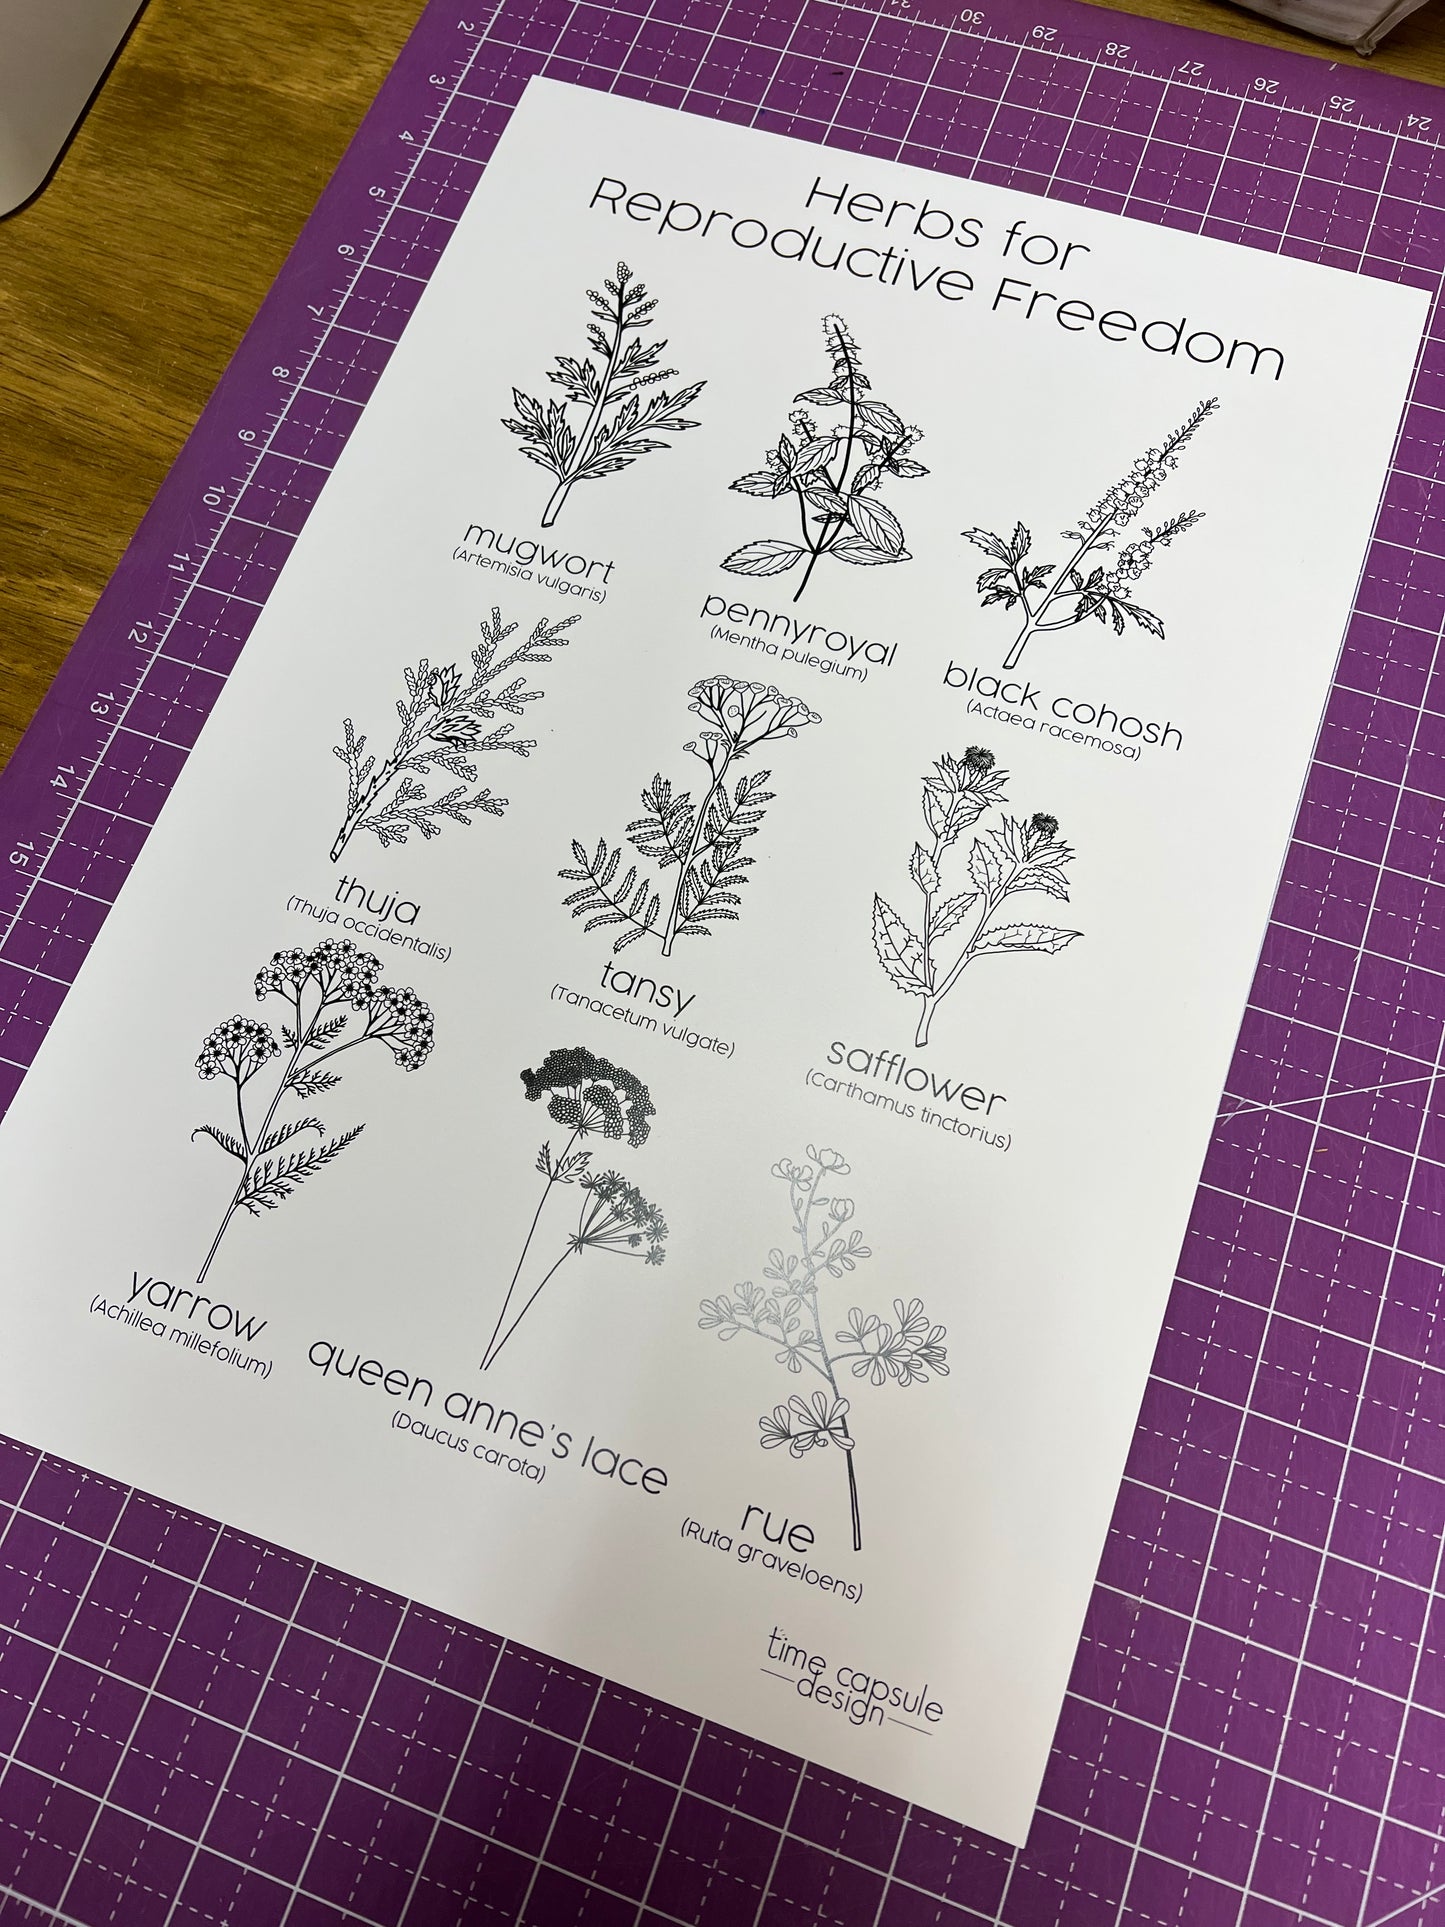 Herbs for Reproductive Freedom Poster